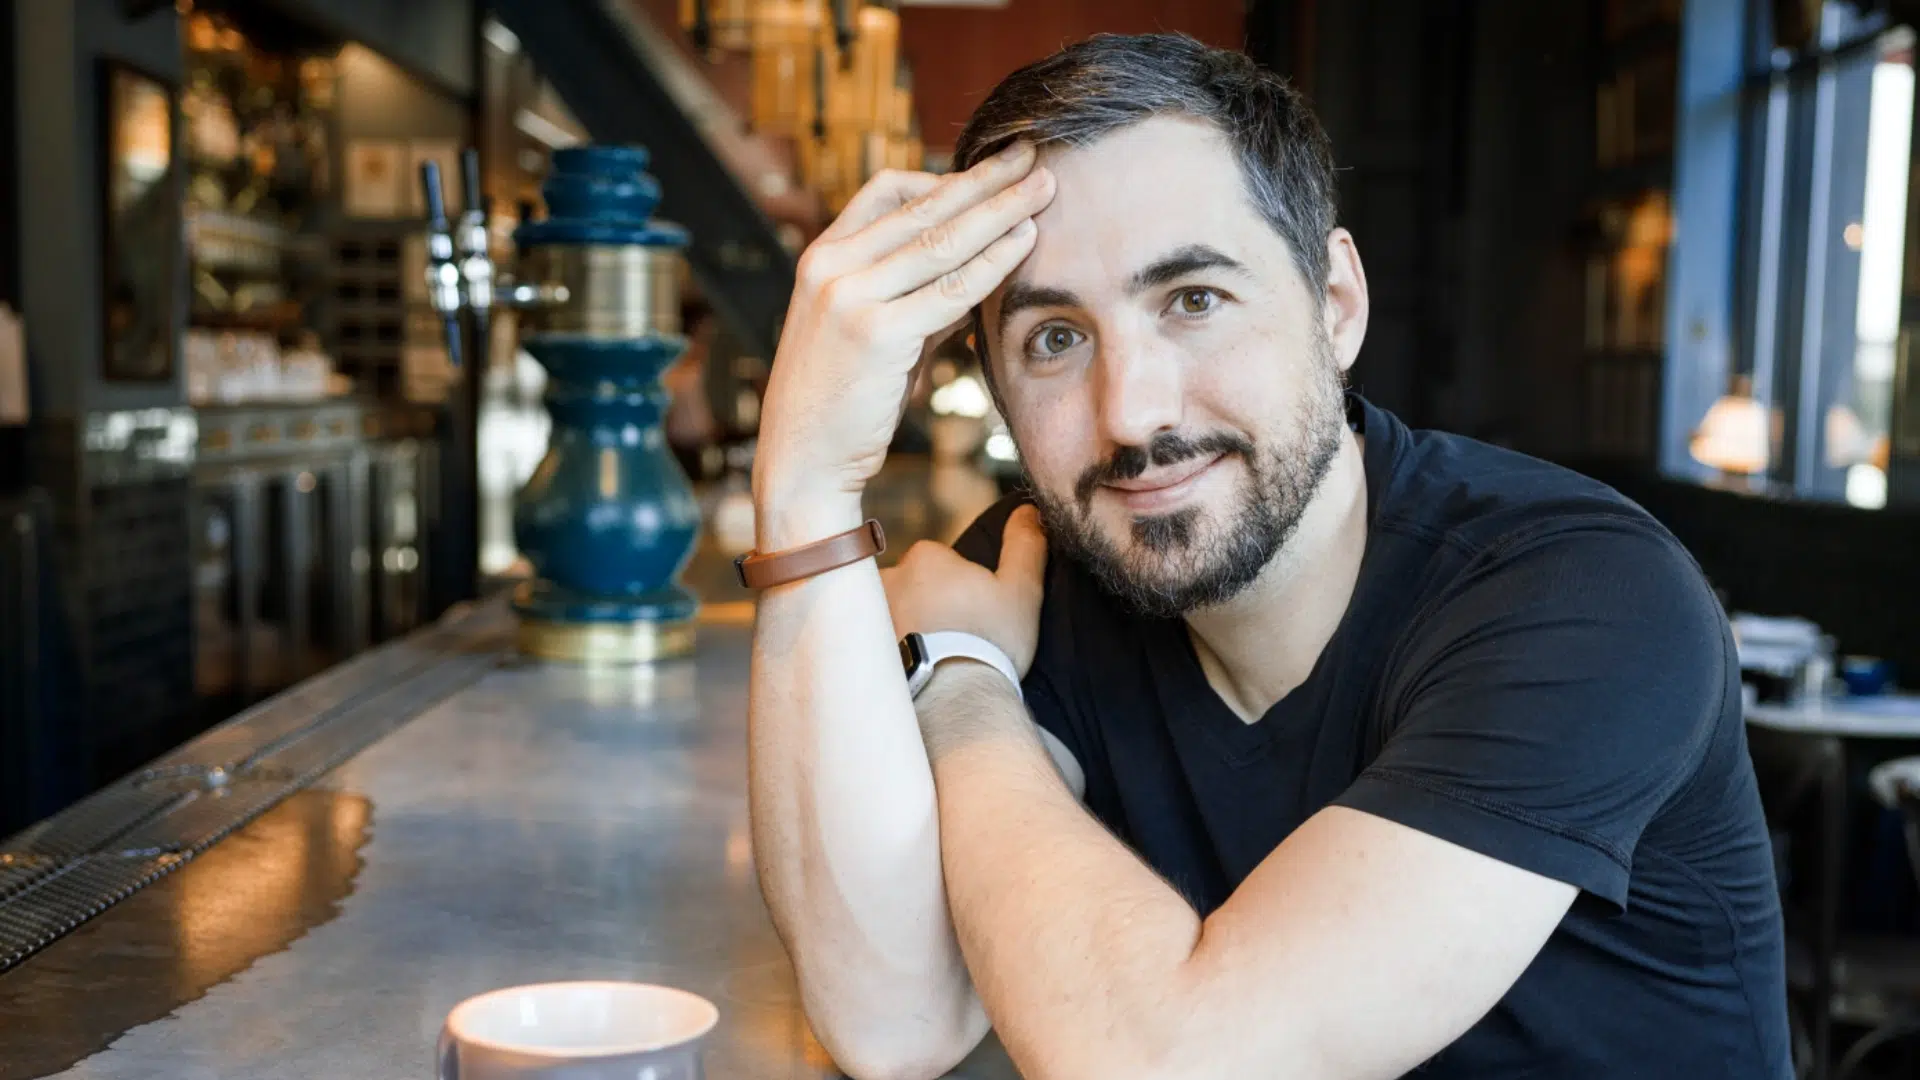 a picture of Moonbirds CEO Kevin rose at a cafe. The founder lost around $2 million worth of NFTs earlier this week.